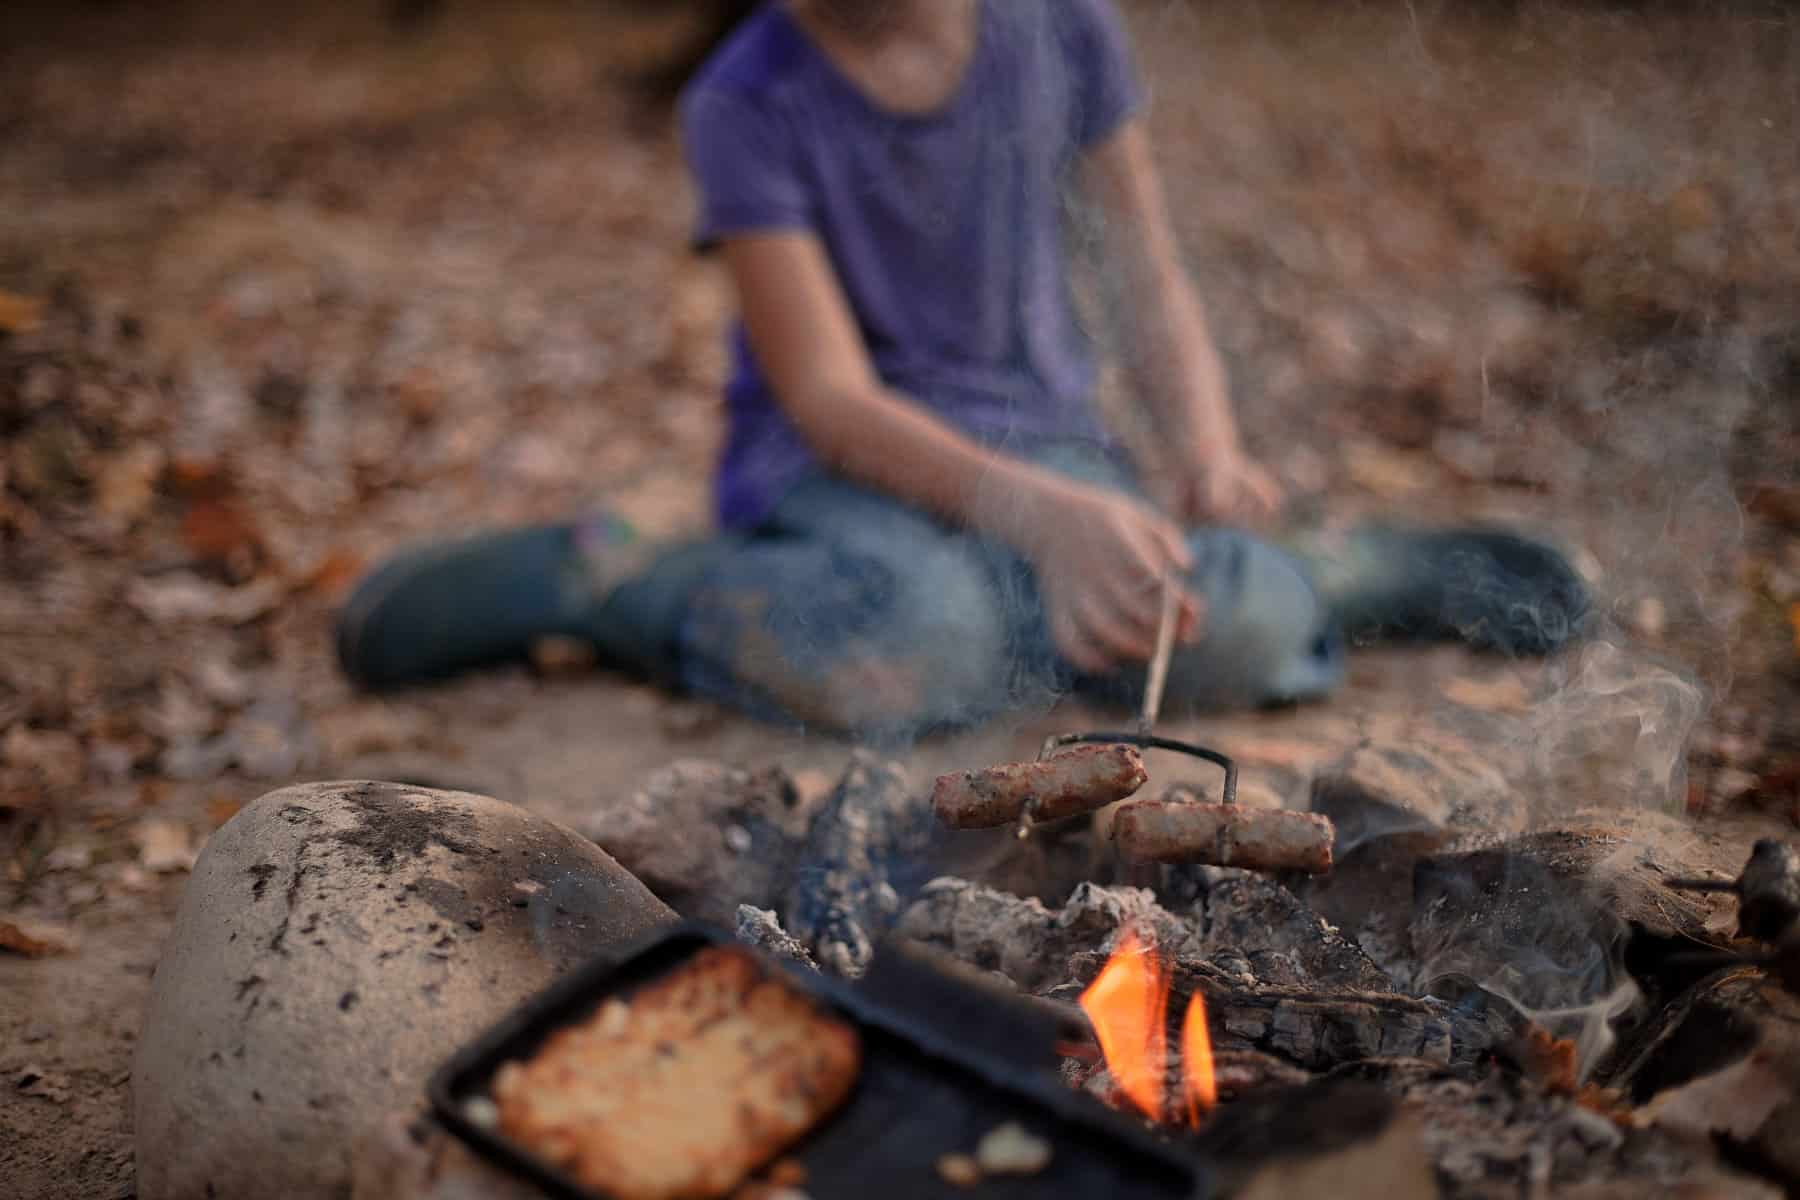 Outdoor Cooking on a Camping Trip